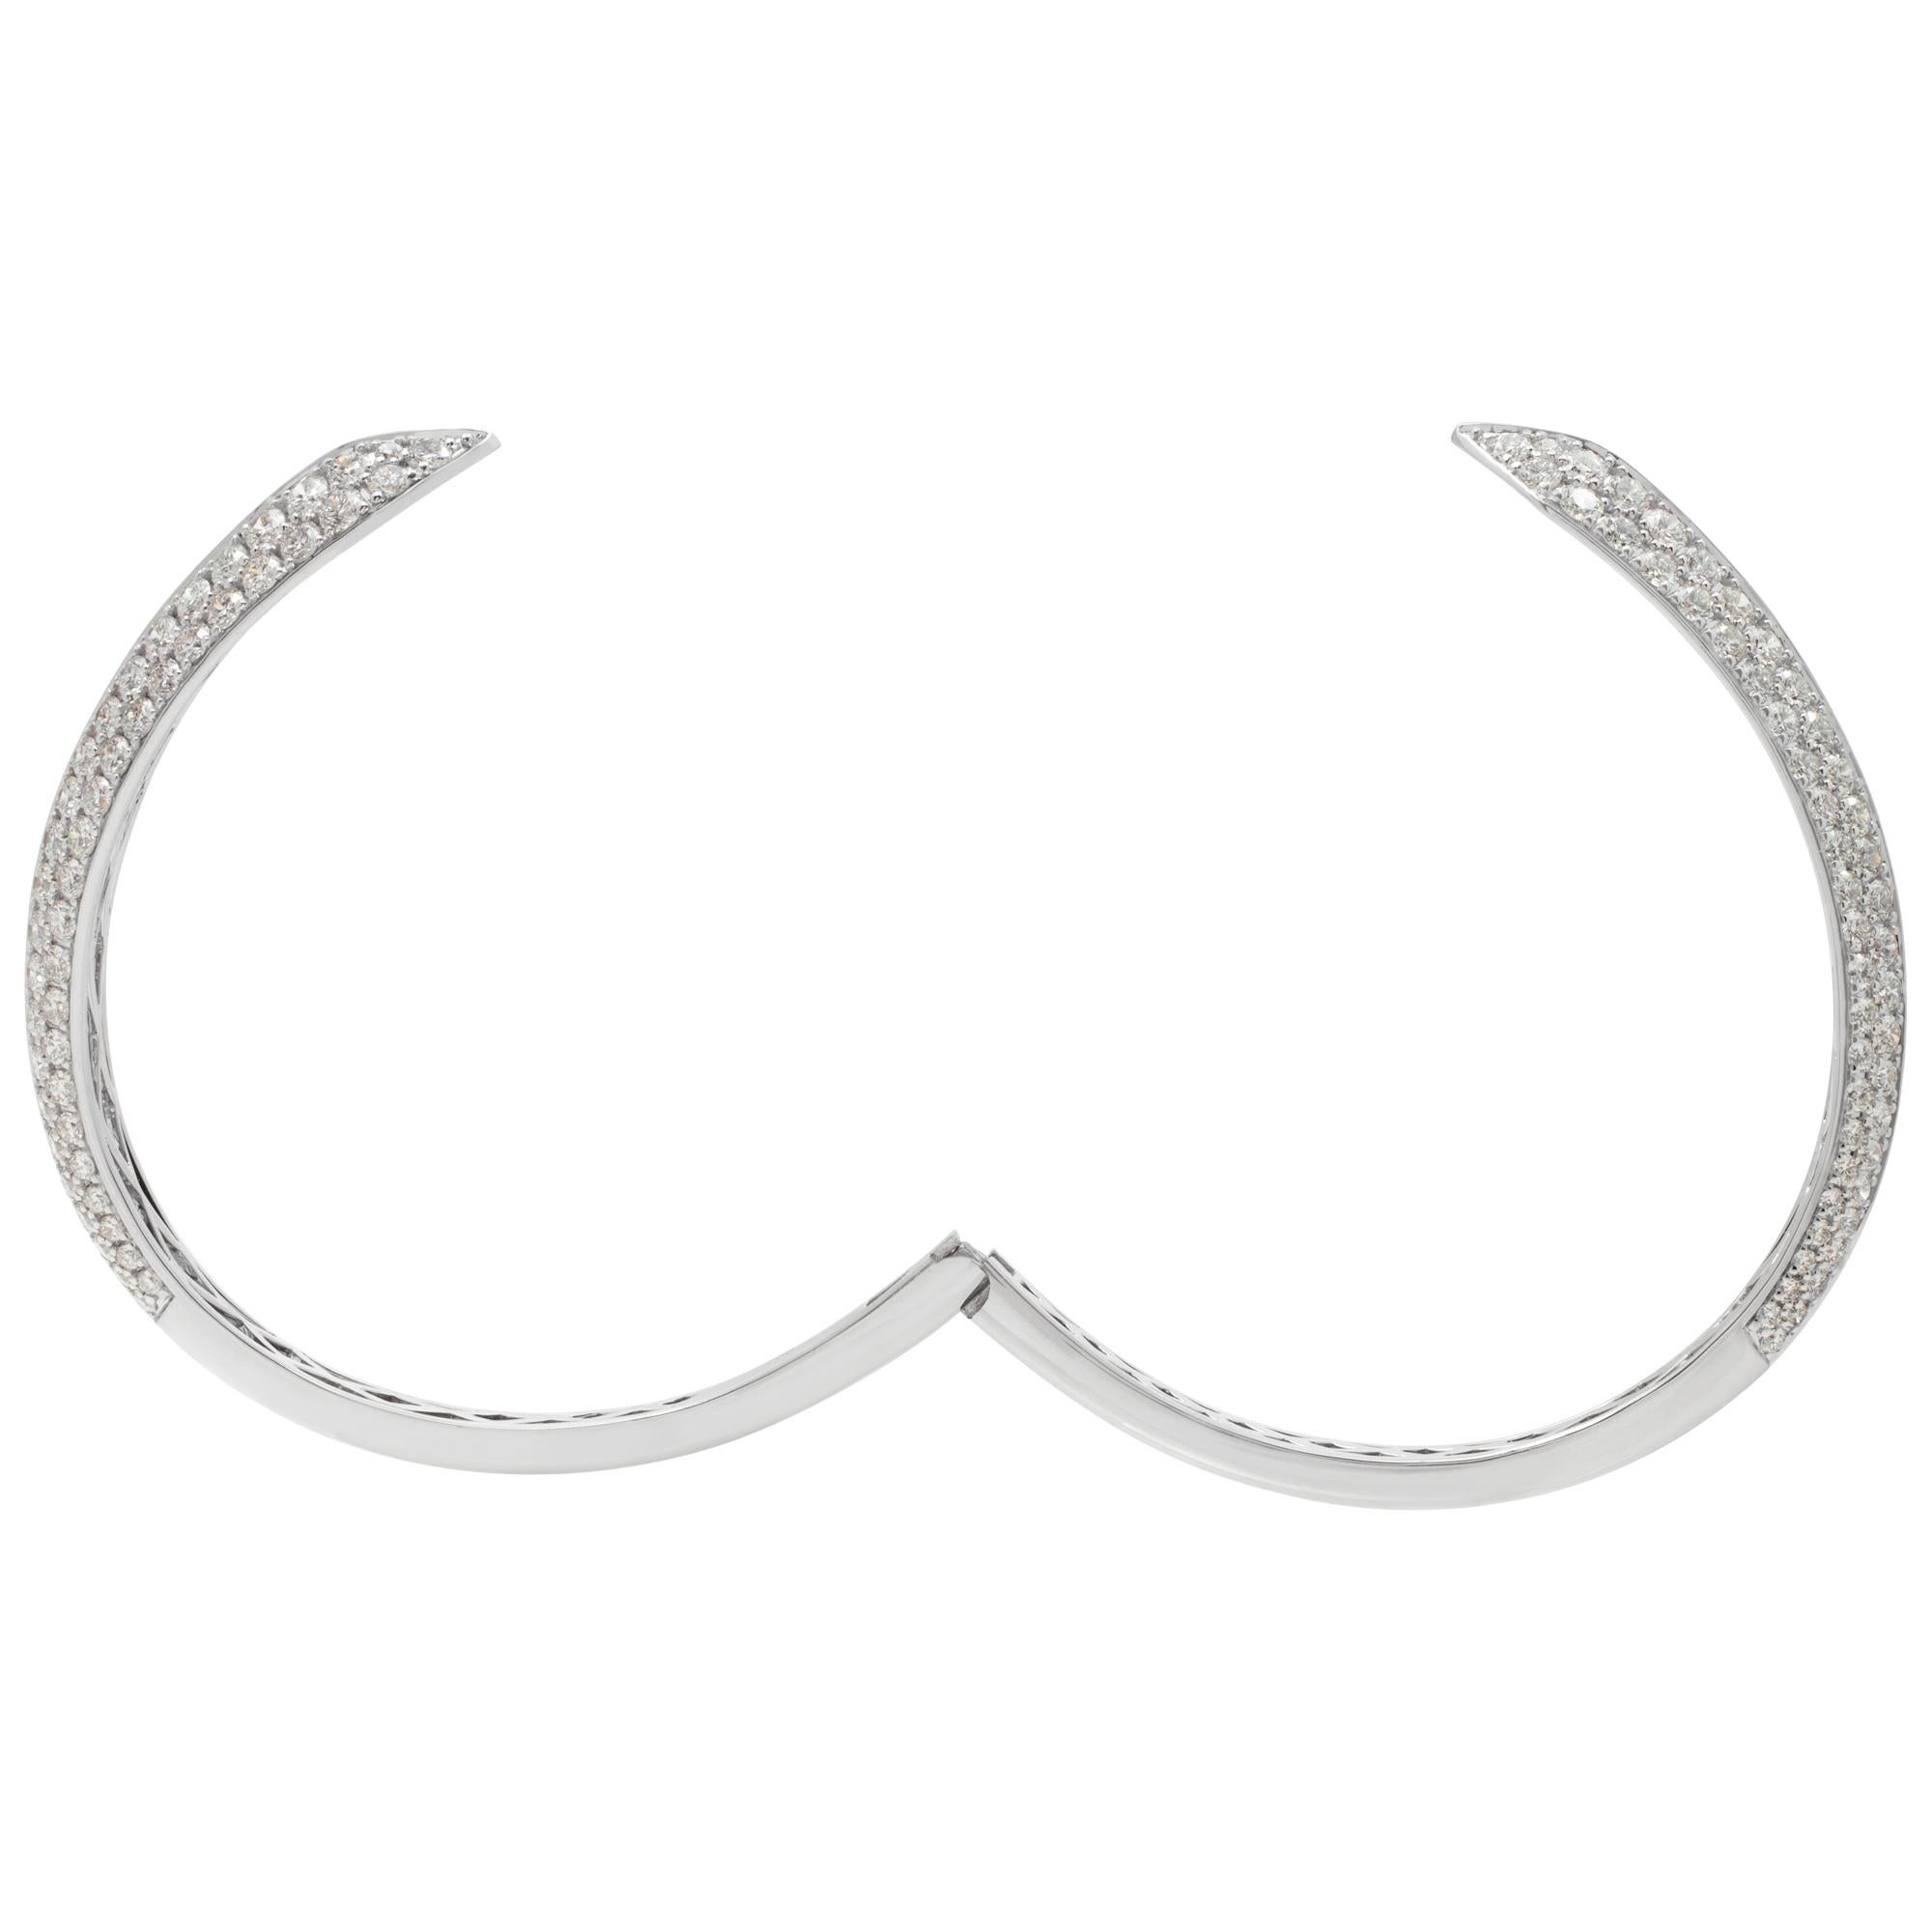 Diamond crossover semi eternity bangle with 7.04 carats in round brilliant cut diamonds (G-H Color, VS Clarity). Fits wrists up to 7 inches.
